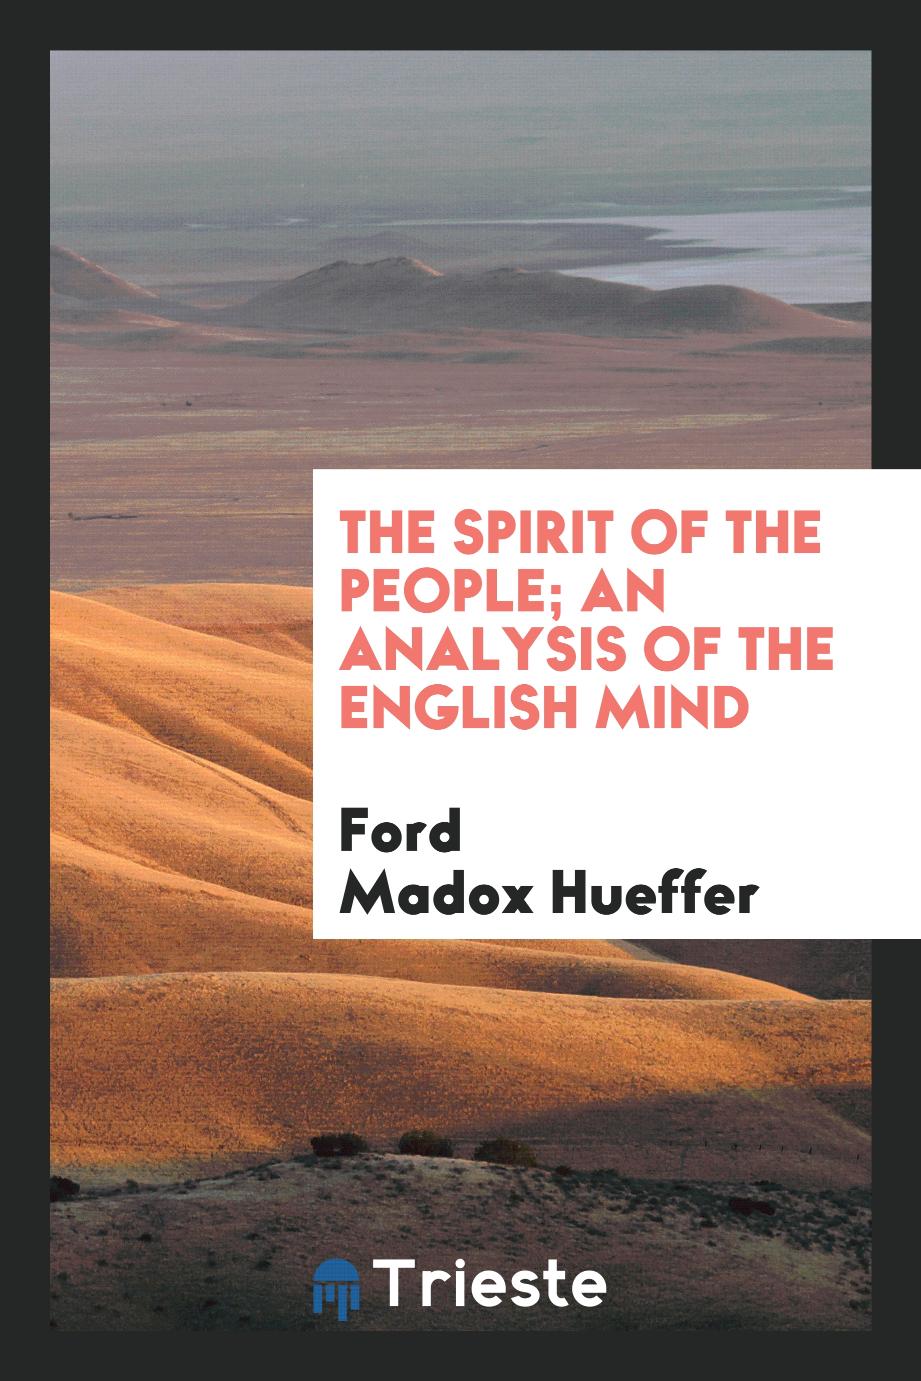 The spirit of the people; an analysis of the English mind